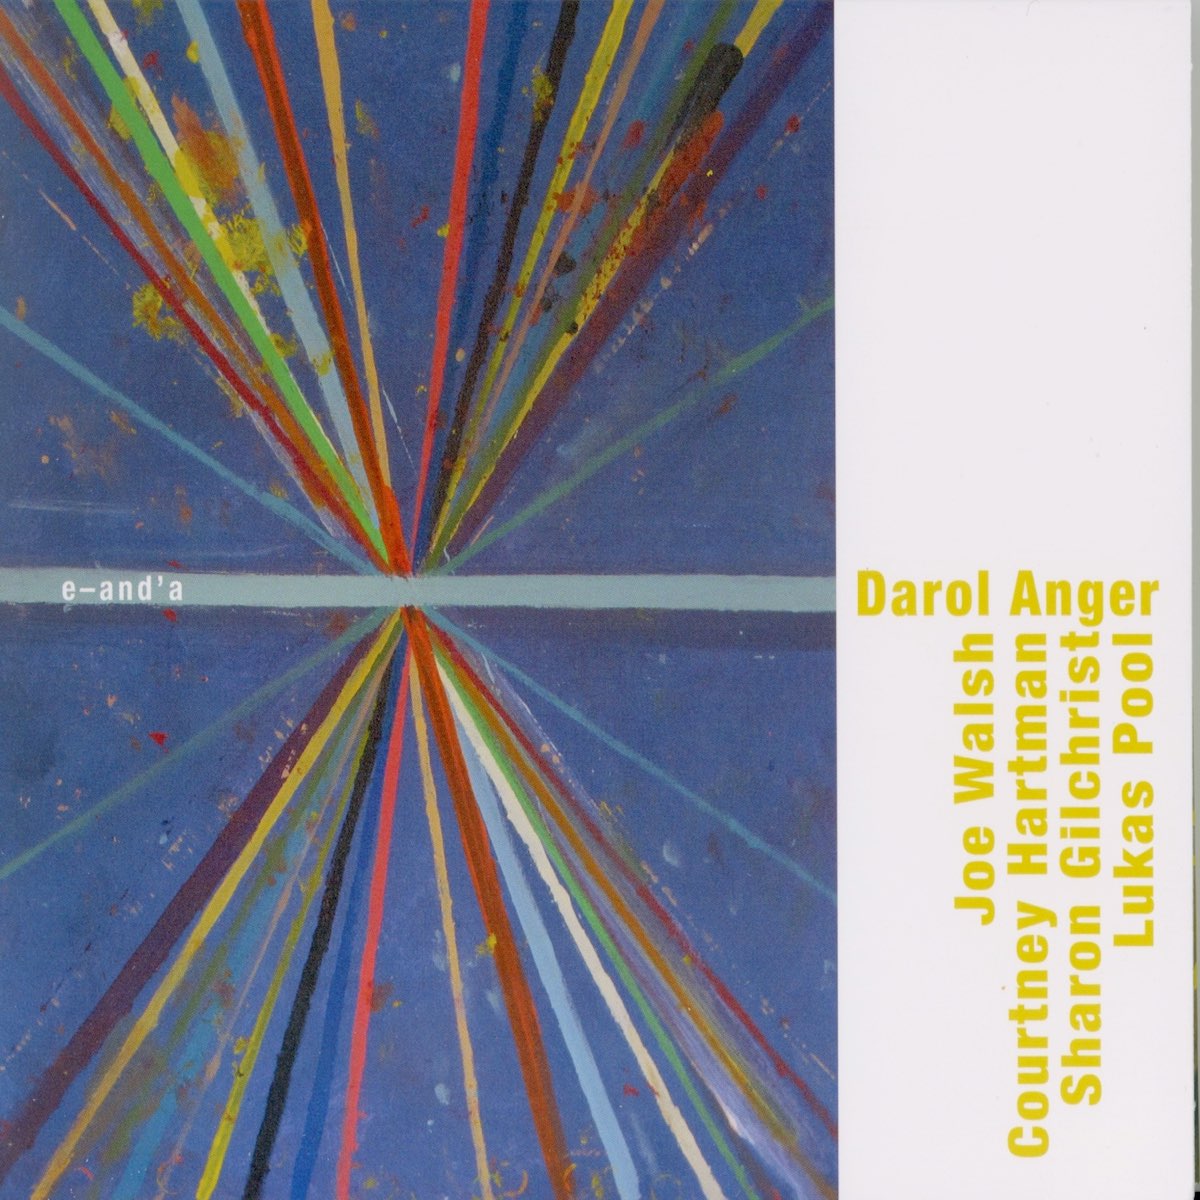 E–And' A by Darol Anger on Apple Music